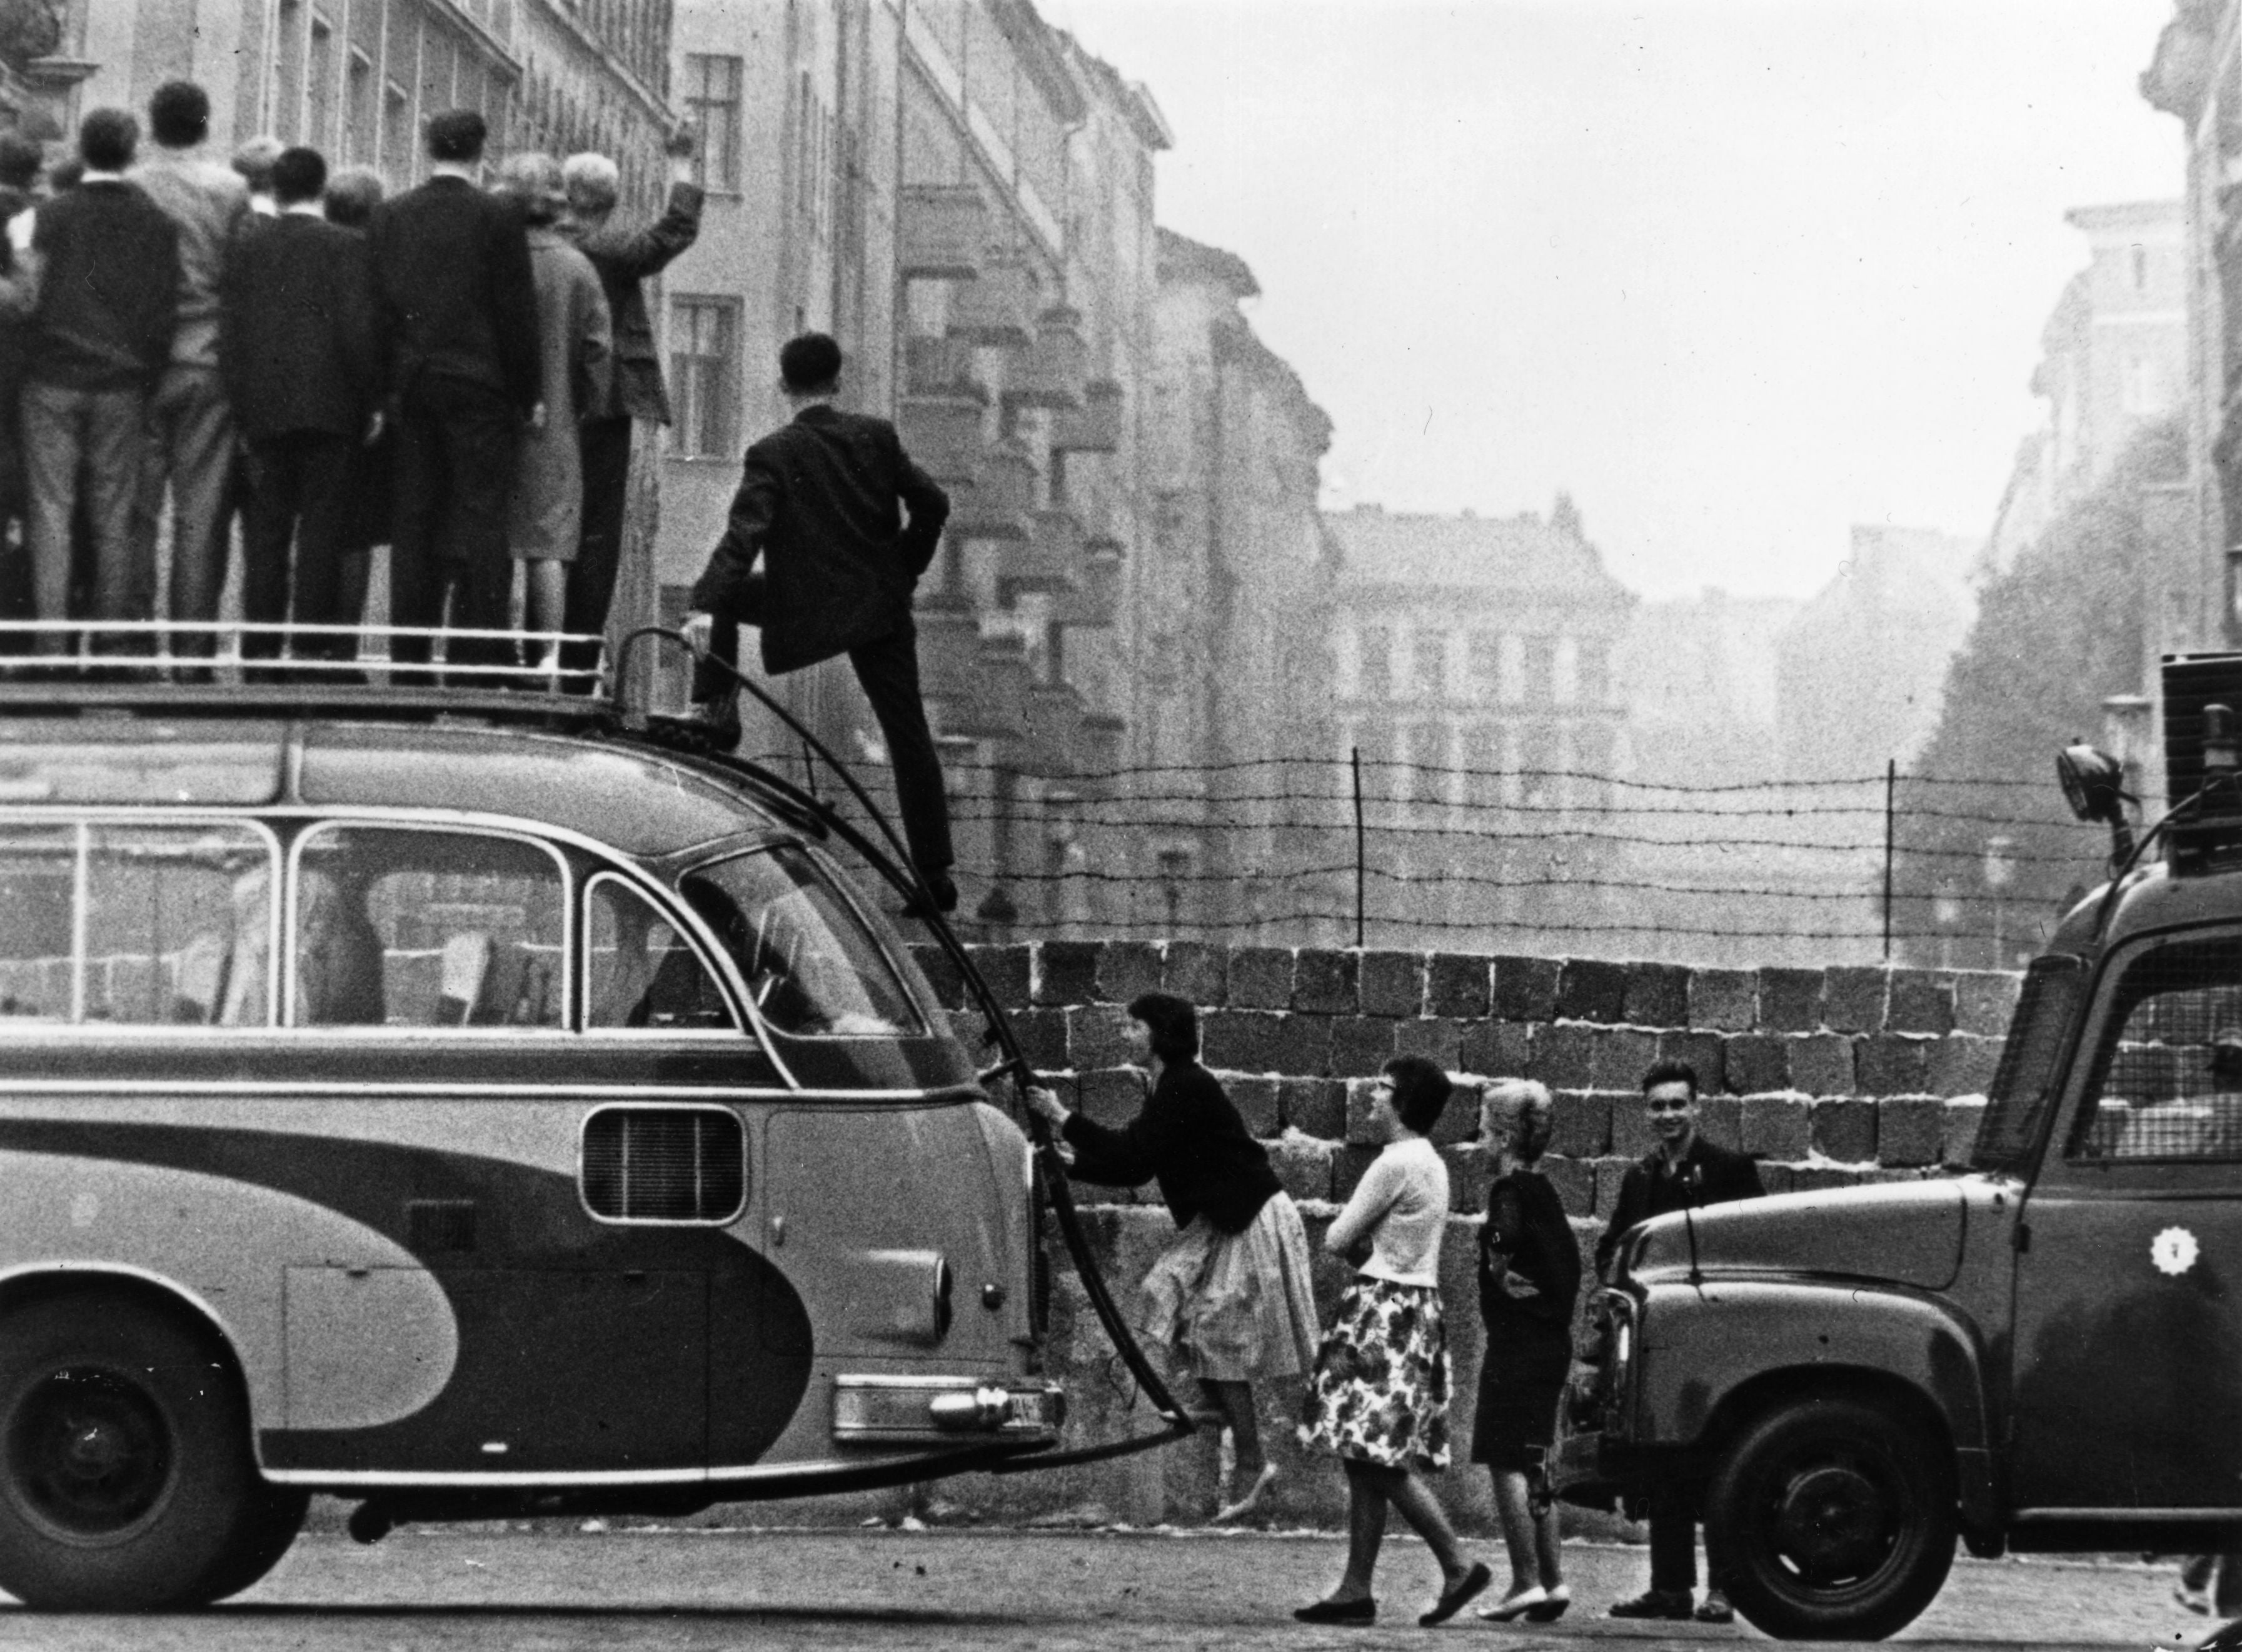 Sightseers climb onto a bus to look at the newly-built Berlin Wall in 1964